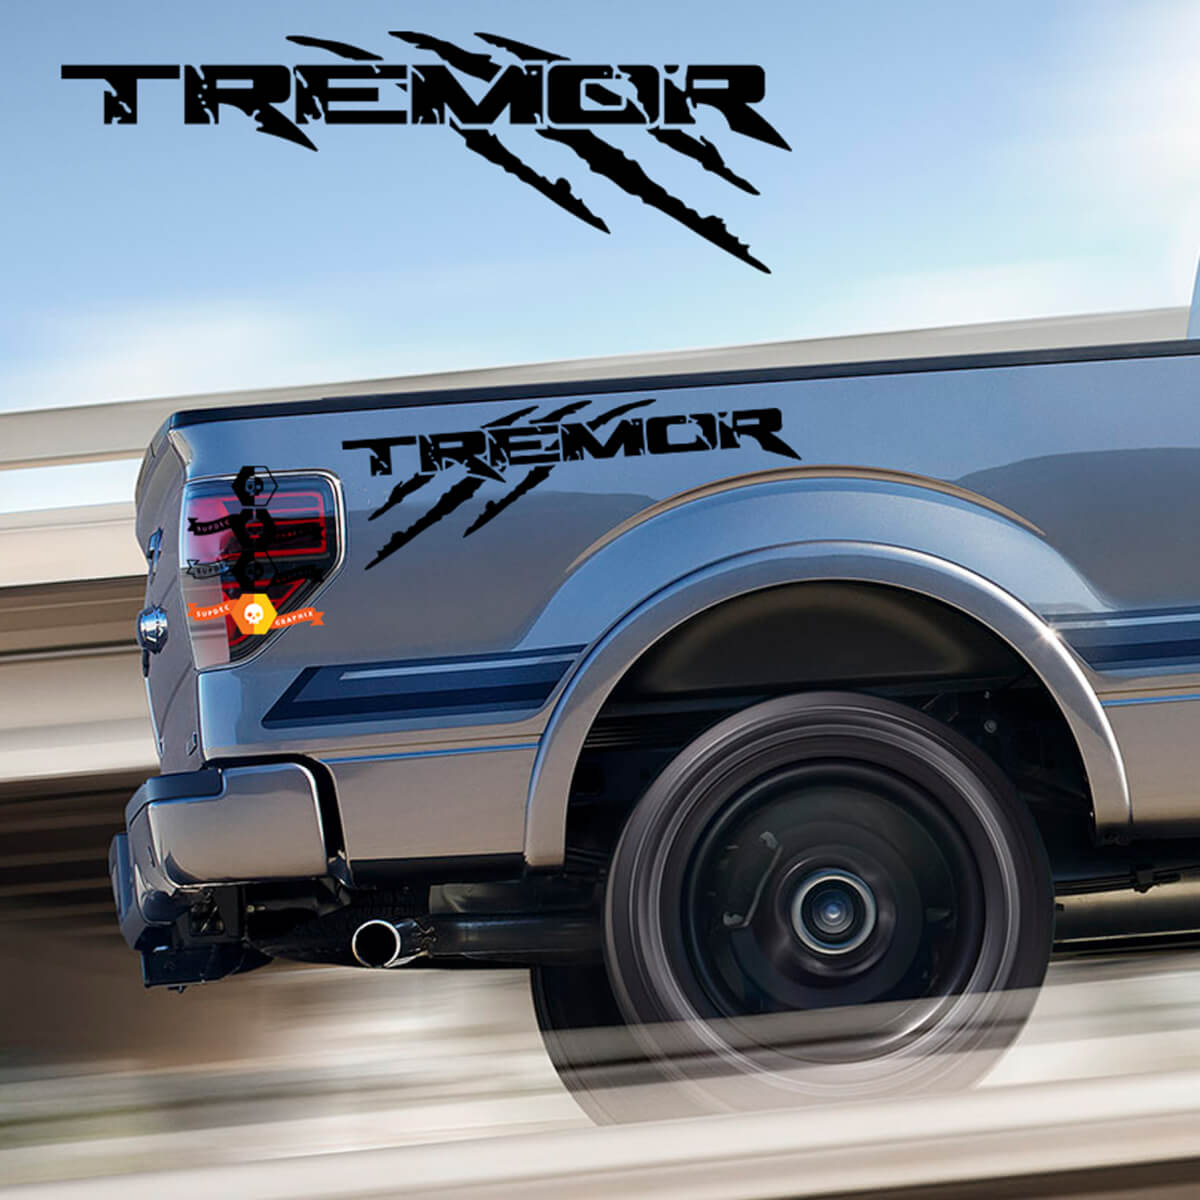 Decal for Ford F-150 Tremor Scratches Raptor Style - Offroad Stickers Truck Bed Side
